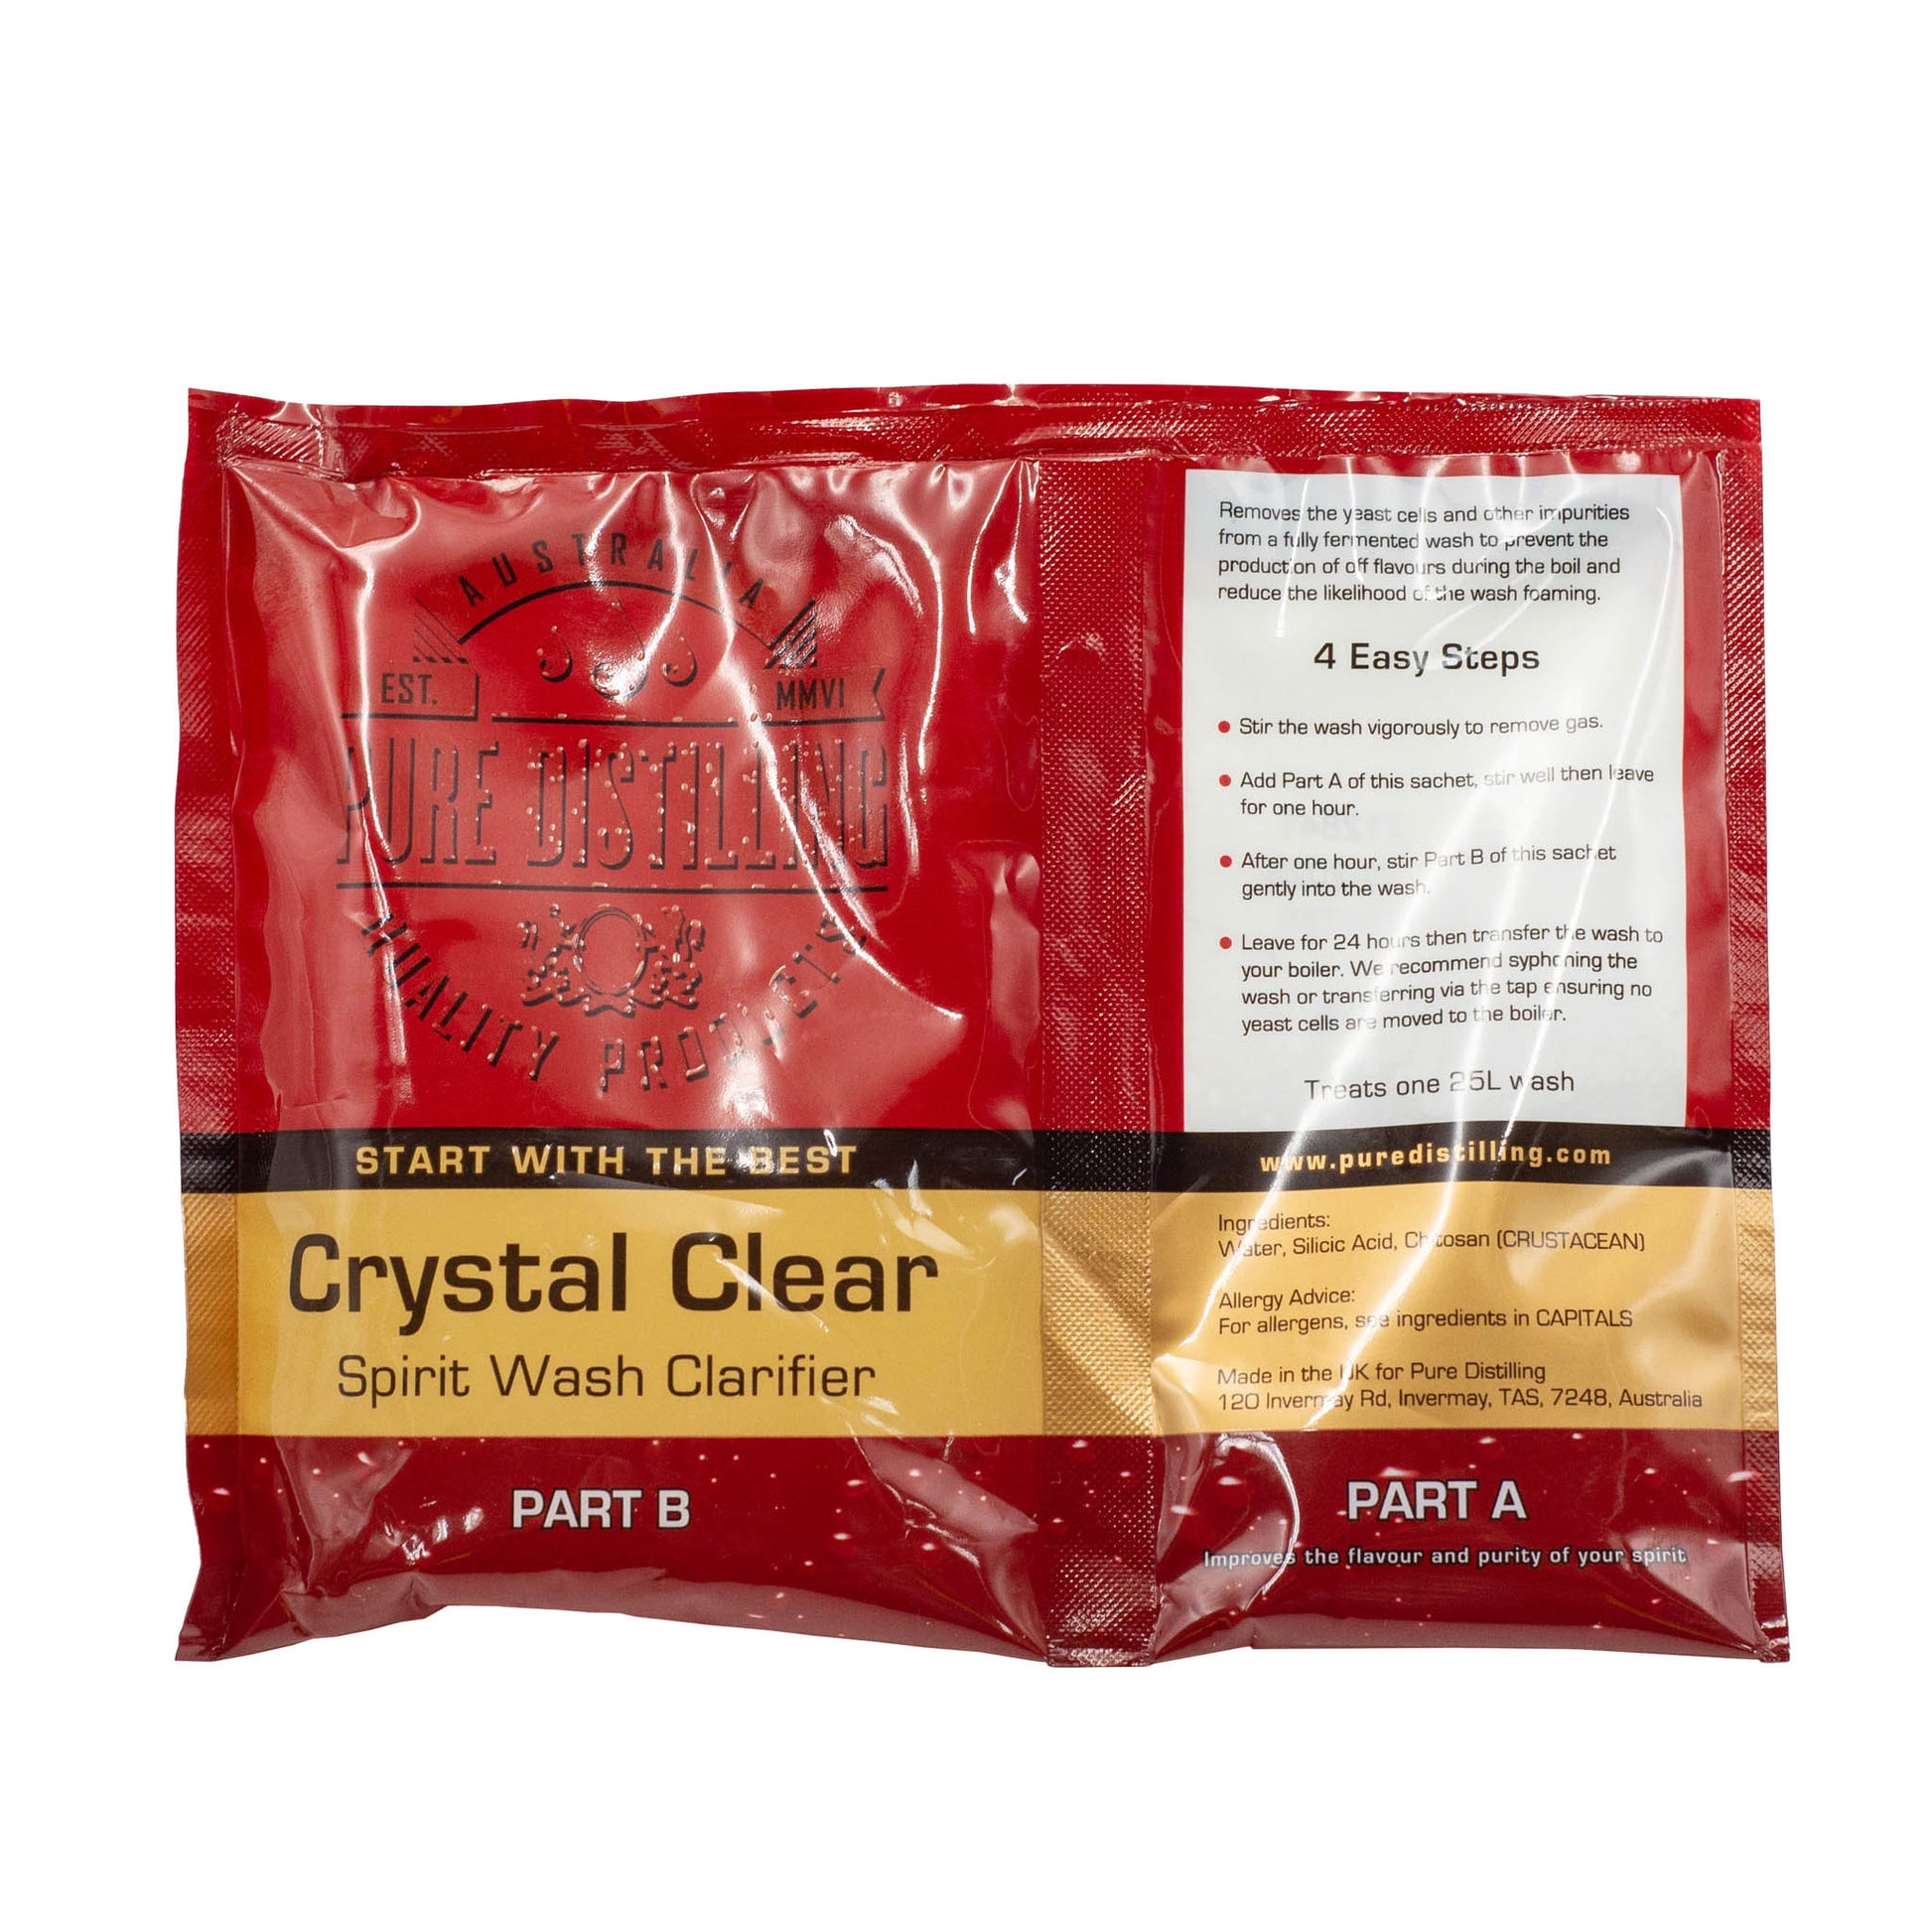 Pure Distilling Crystal Clear Spirit Wash Clarifier  Removes the yeast cells and other impurities from a fully fermented wash to prevent them contaminating your spirit while distilling